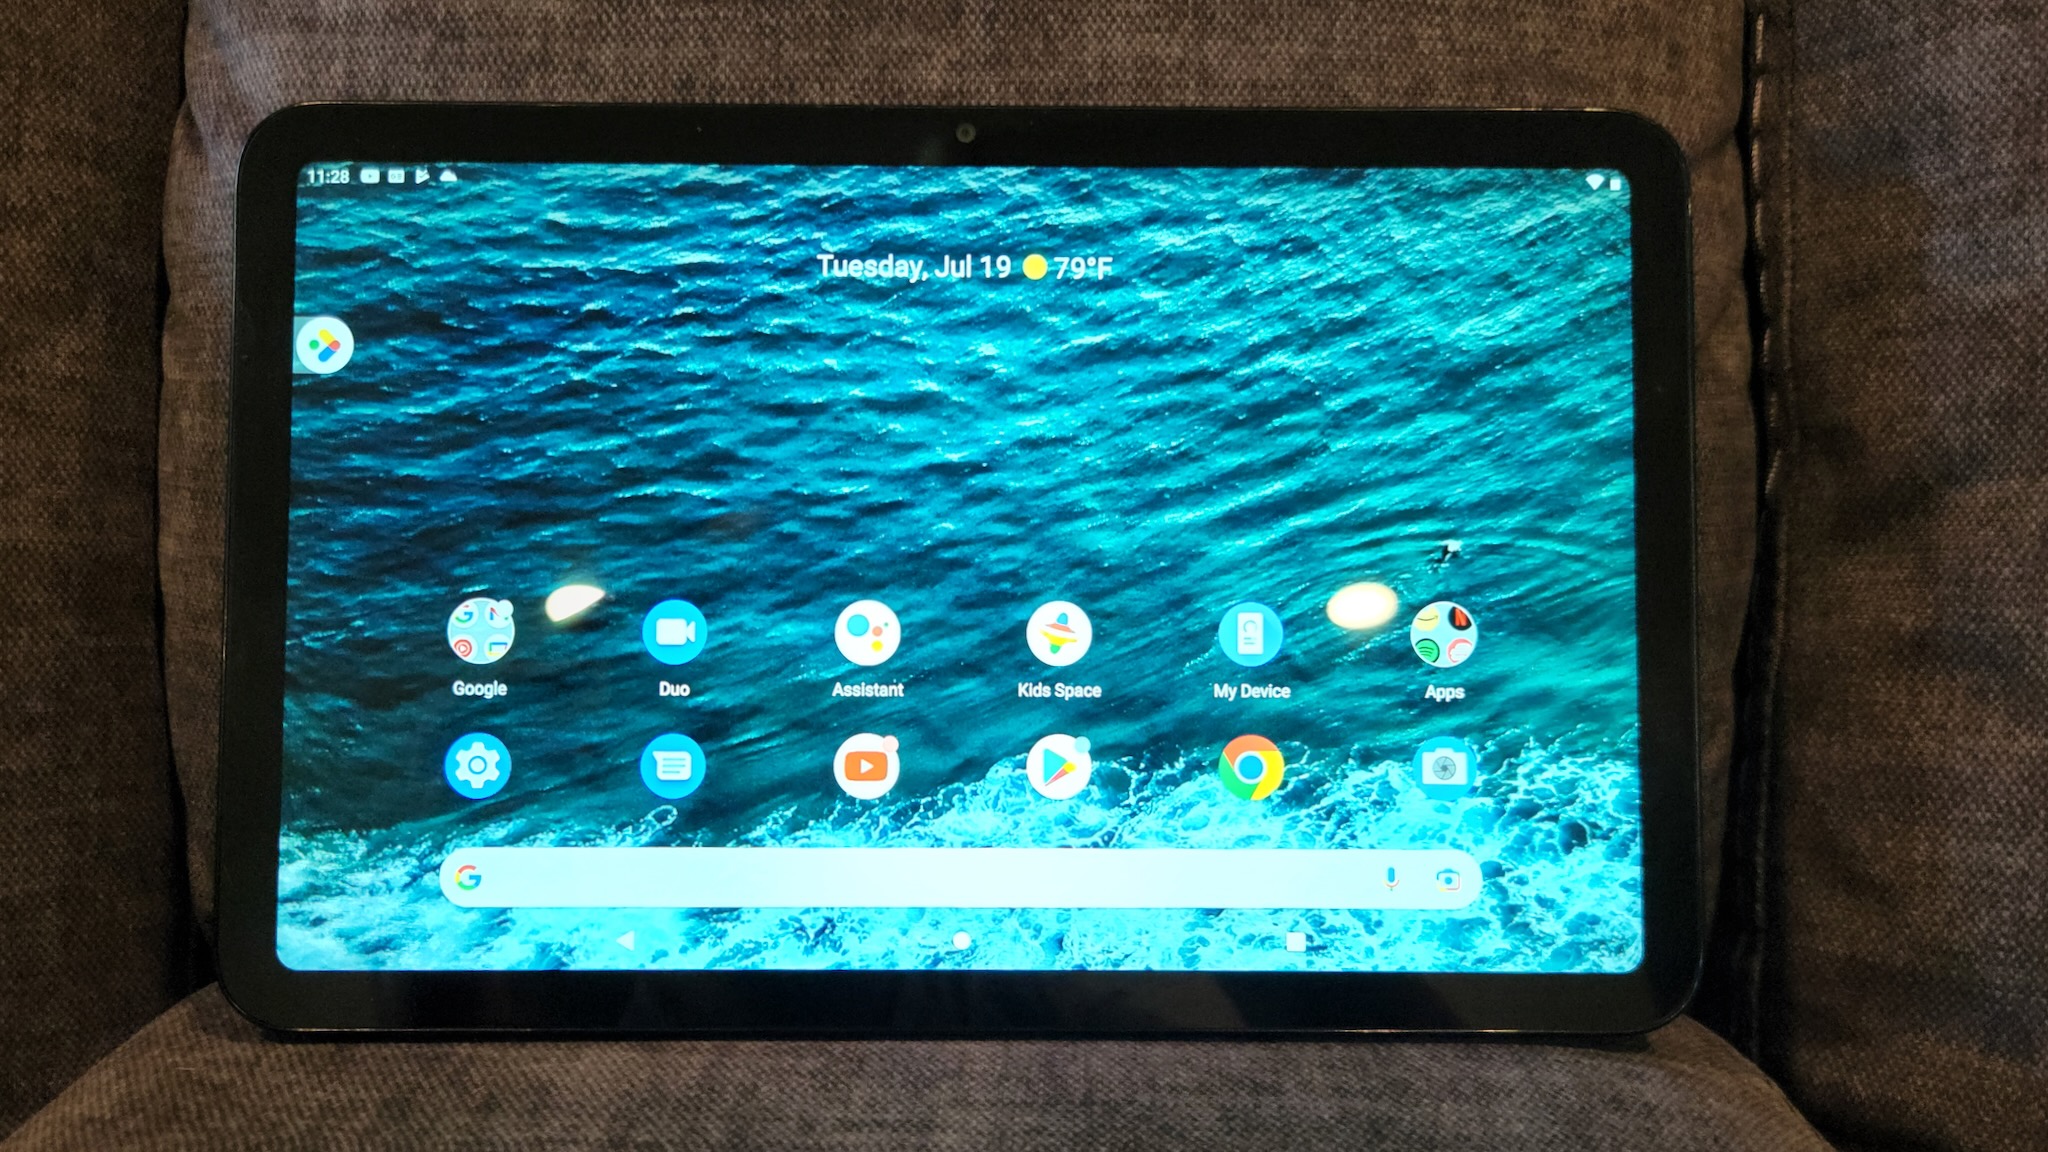 Nokia T20 tablet receives Android 13 update with new Features